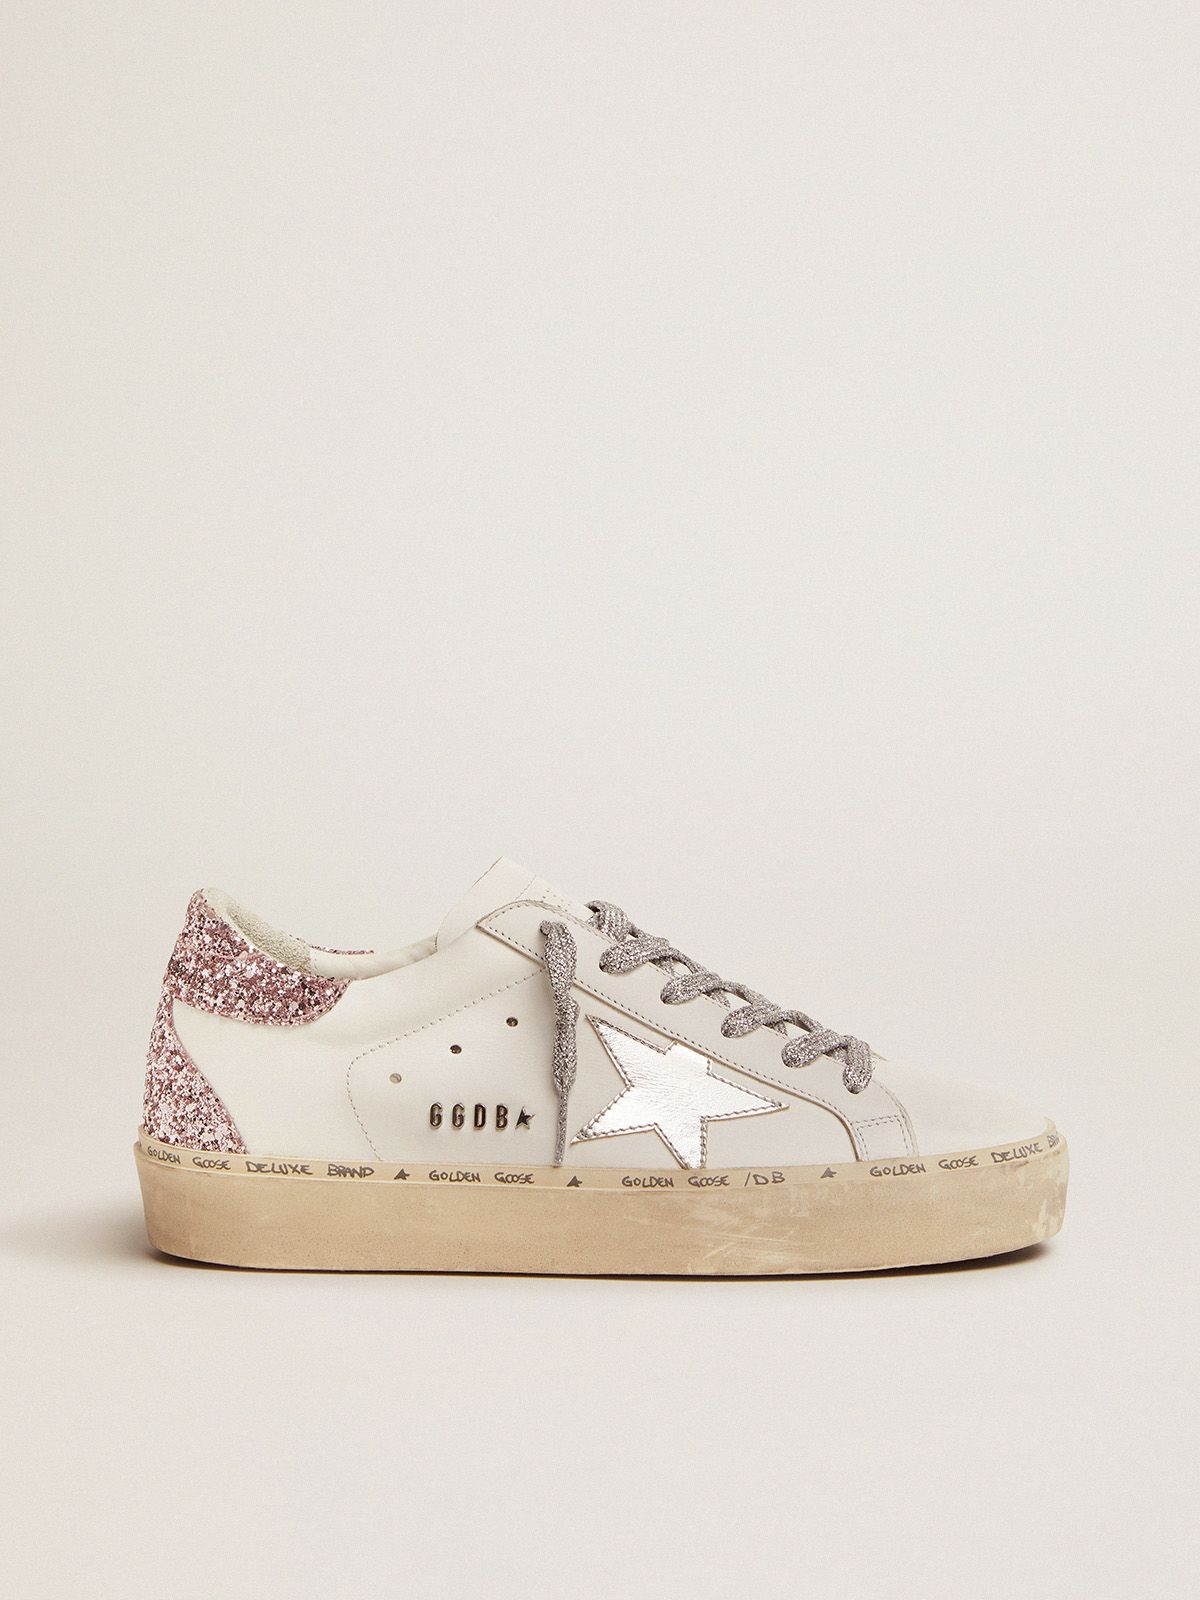 golden goose sneakers laminated silver quartz-pink and glitter Star heel Hi leather with tab star